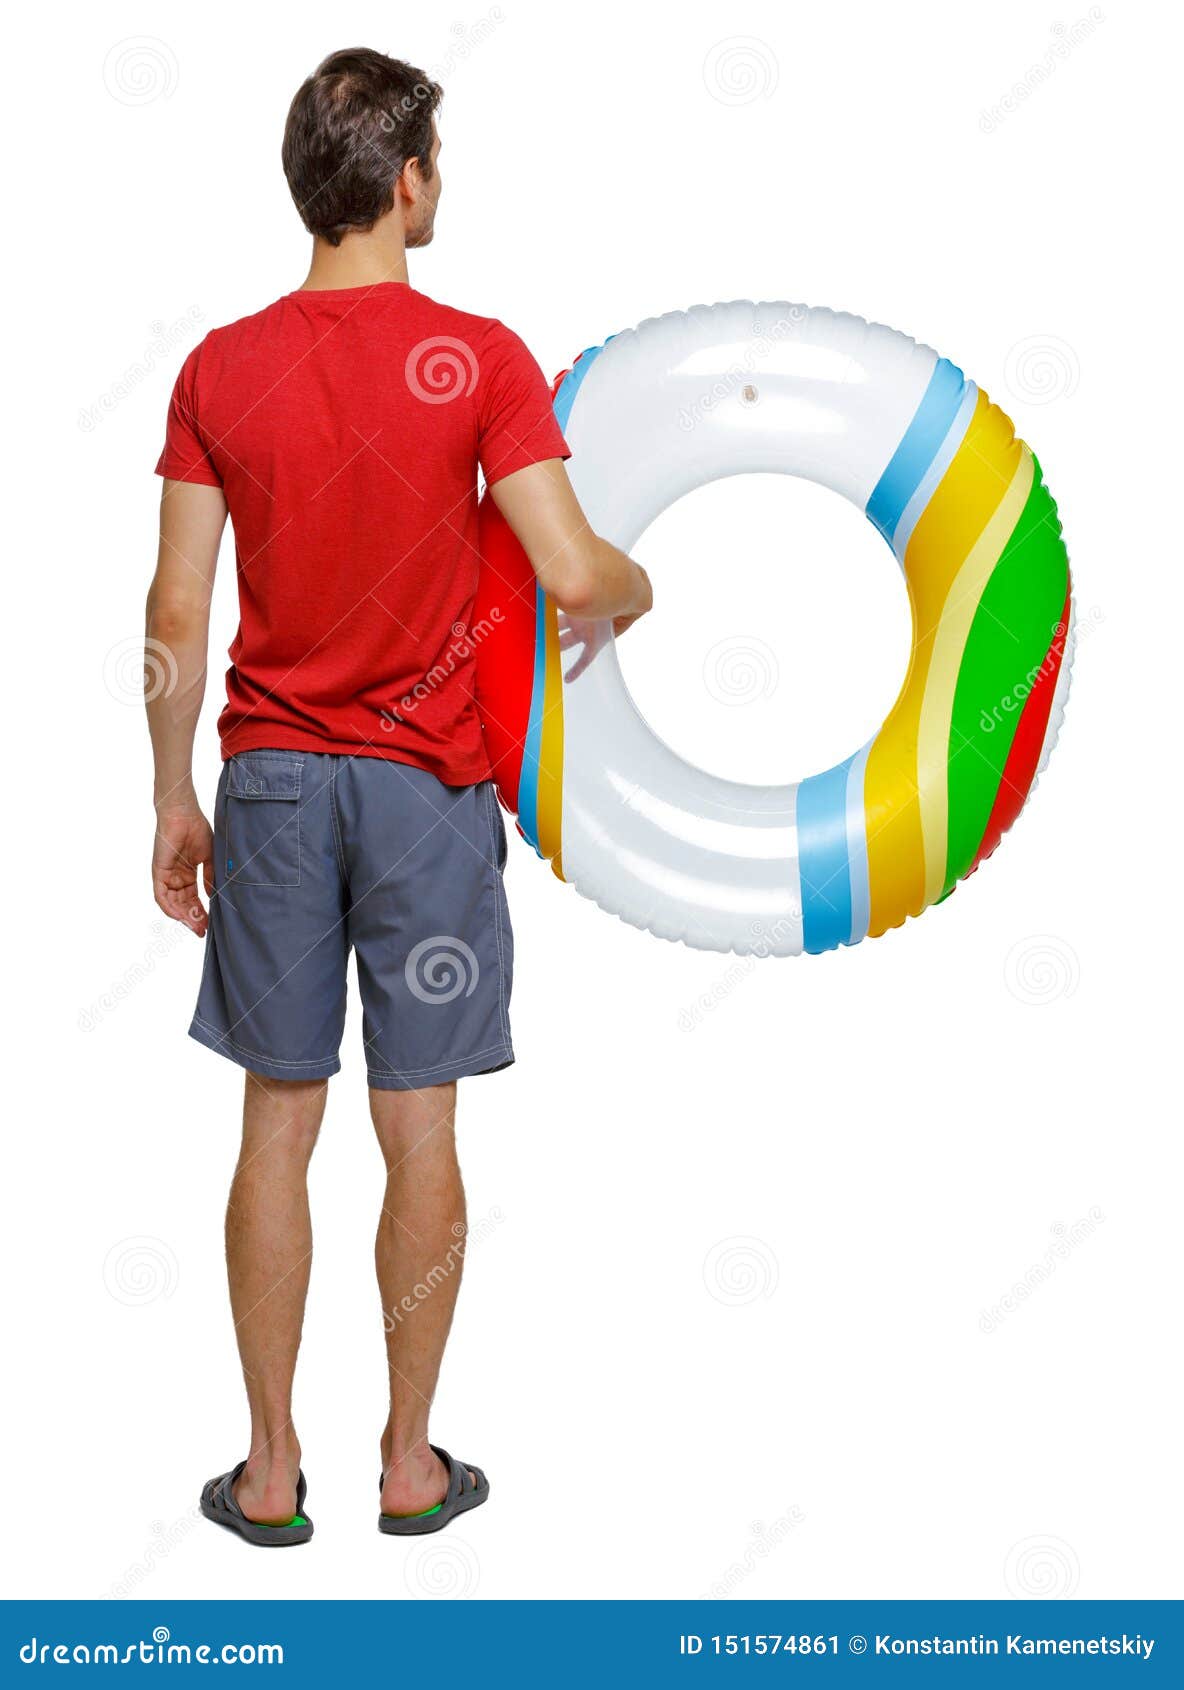 Back View Of A Man In Shorts With An Inflatable Circle Stock Image Image Of Back Rear 151574861